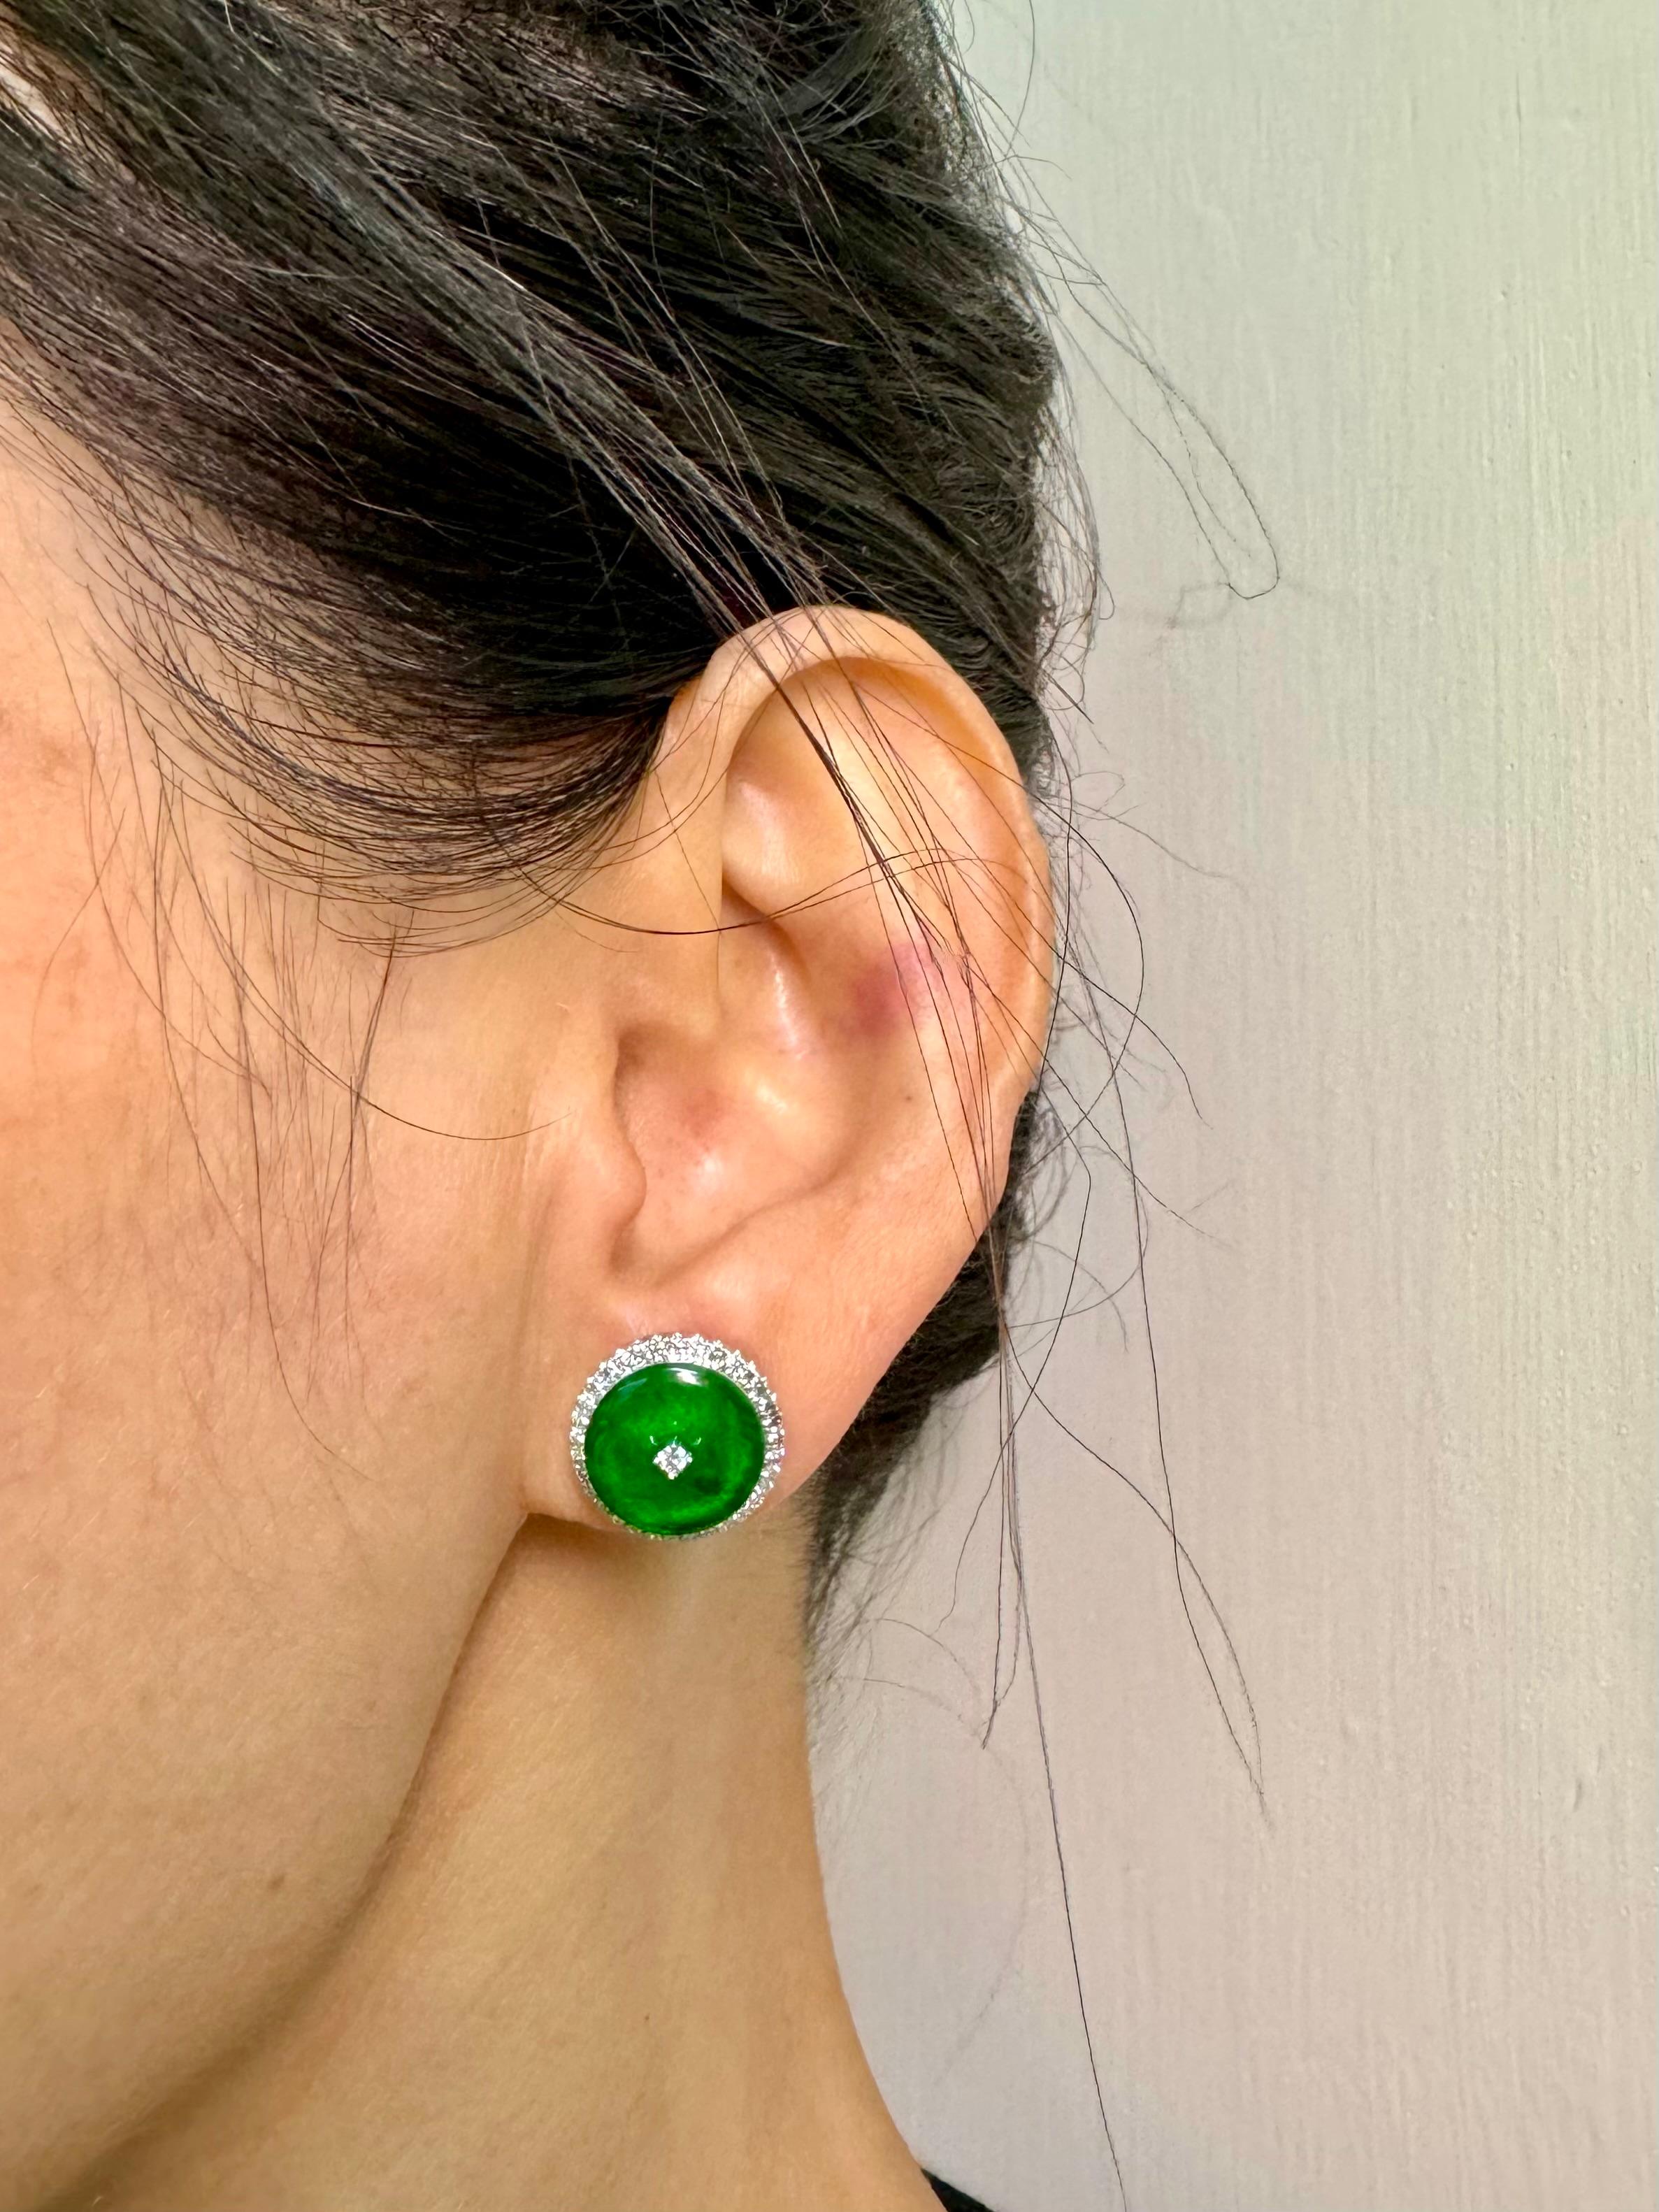 Please check out the HD video! Here is a nice pair of bright apple green Jade earrings. Each earring is about 14mm. The earrings are set in 18k white gold and diamonds. There are 67 white brilliant diamonds totaling 0.44Cts that make up the halo.